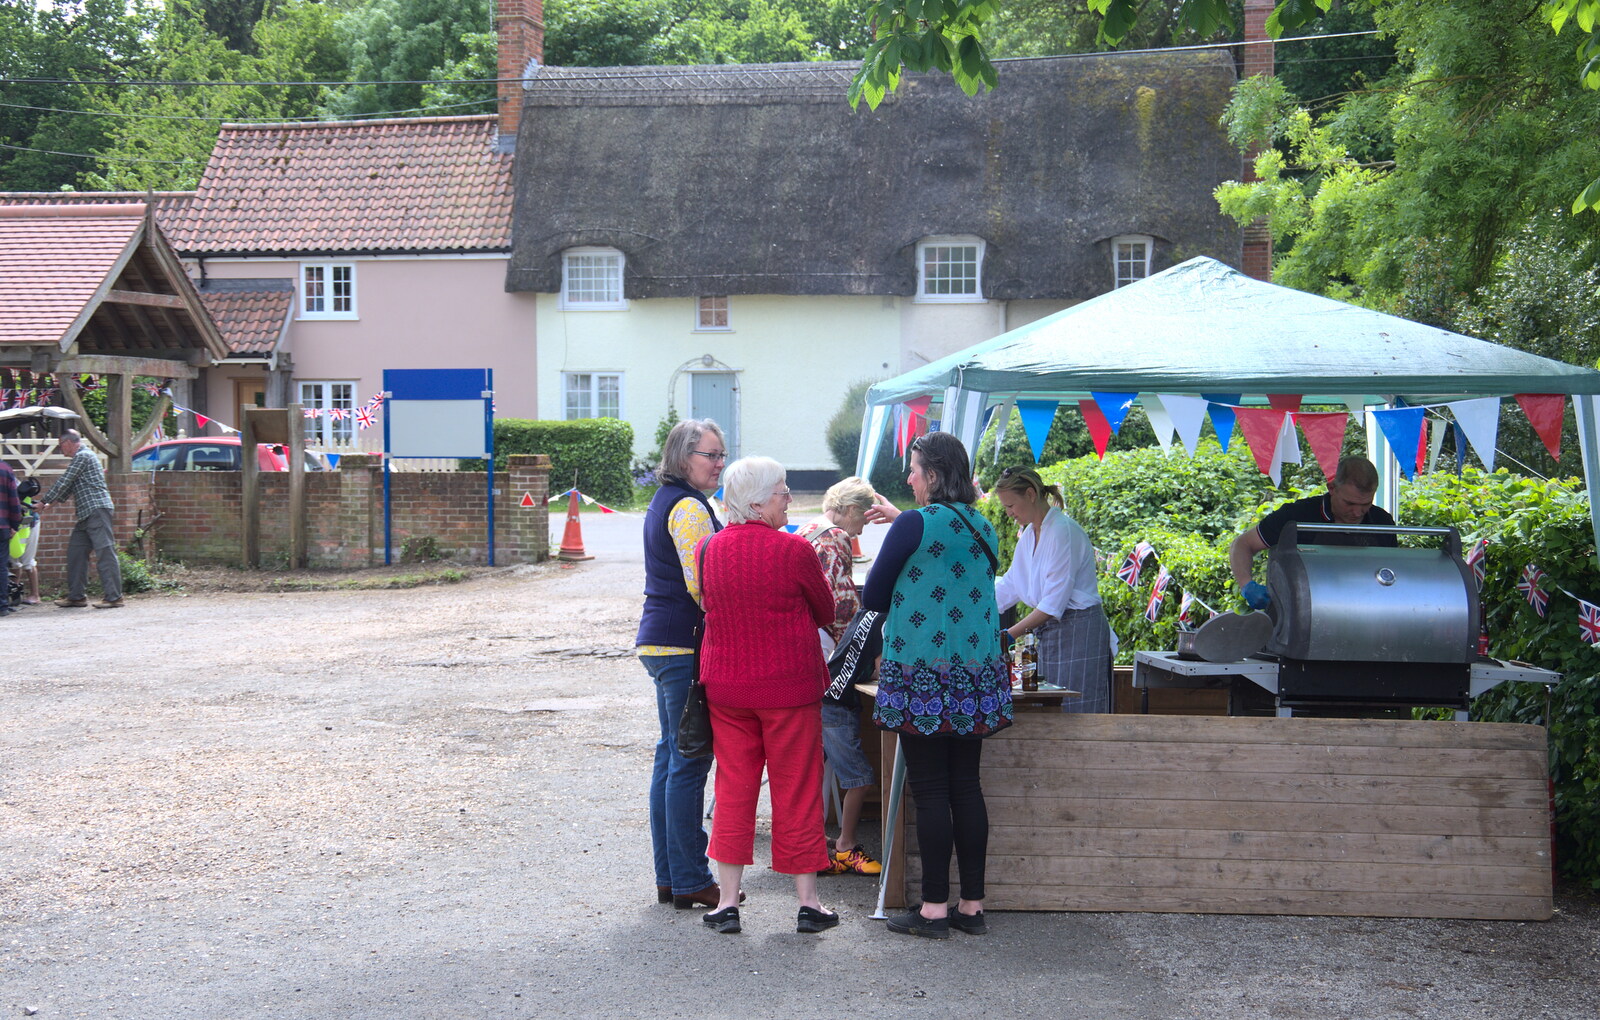 Brome Street barbeque from A Right Royal Wedding at the Village Hall, Brome, Suffolk - 19th May 2018